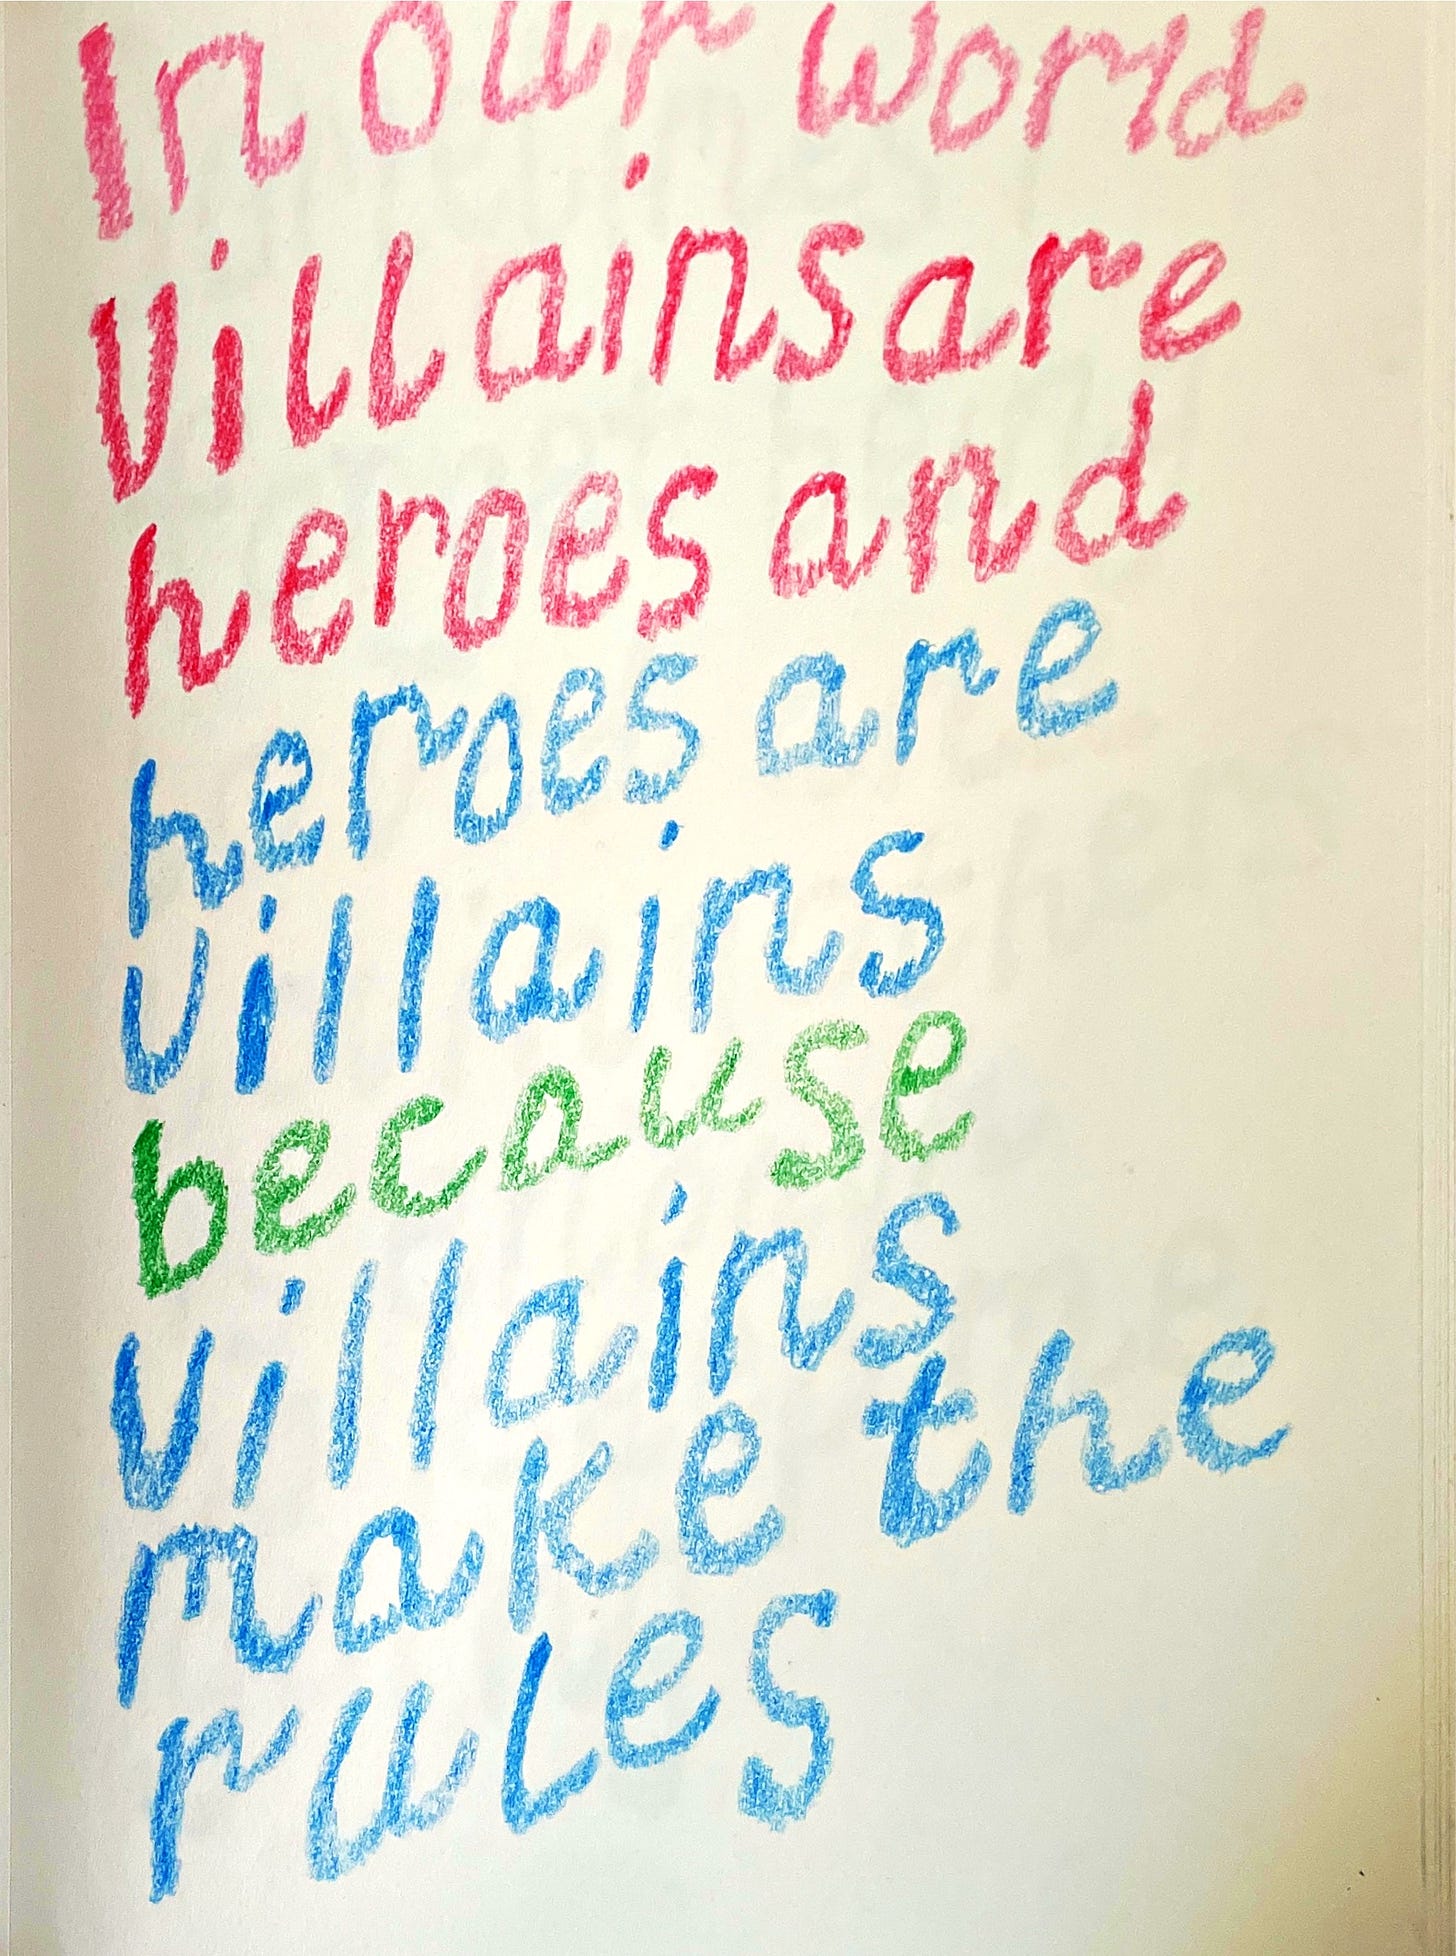 In our world villains are heores and heroes are villains because villains make the rules